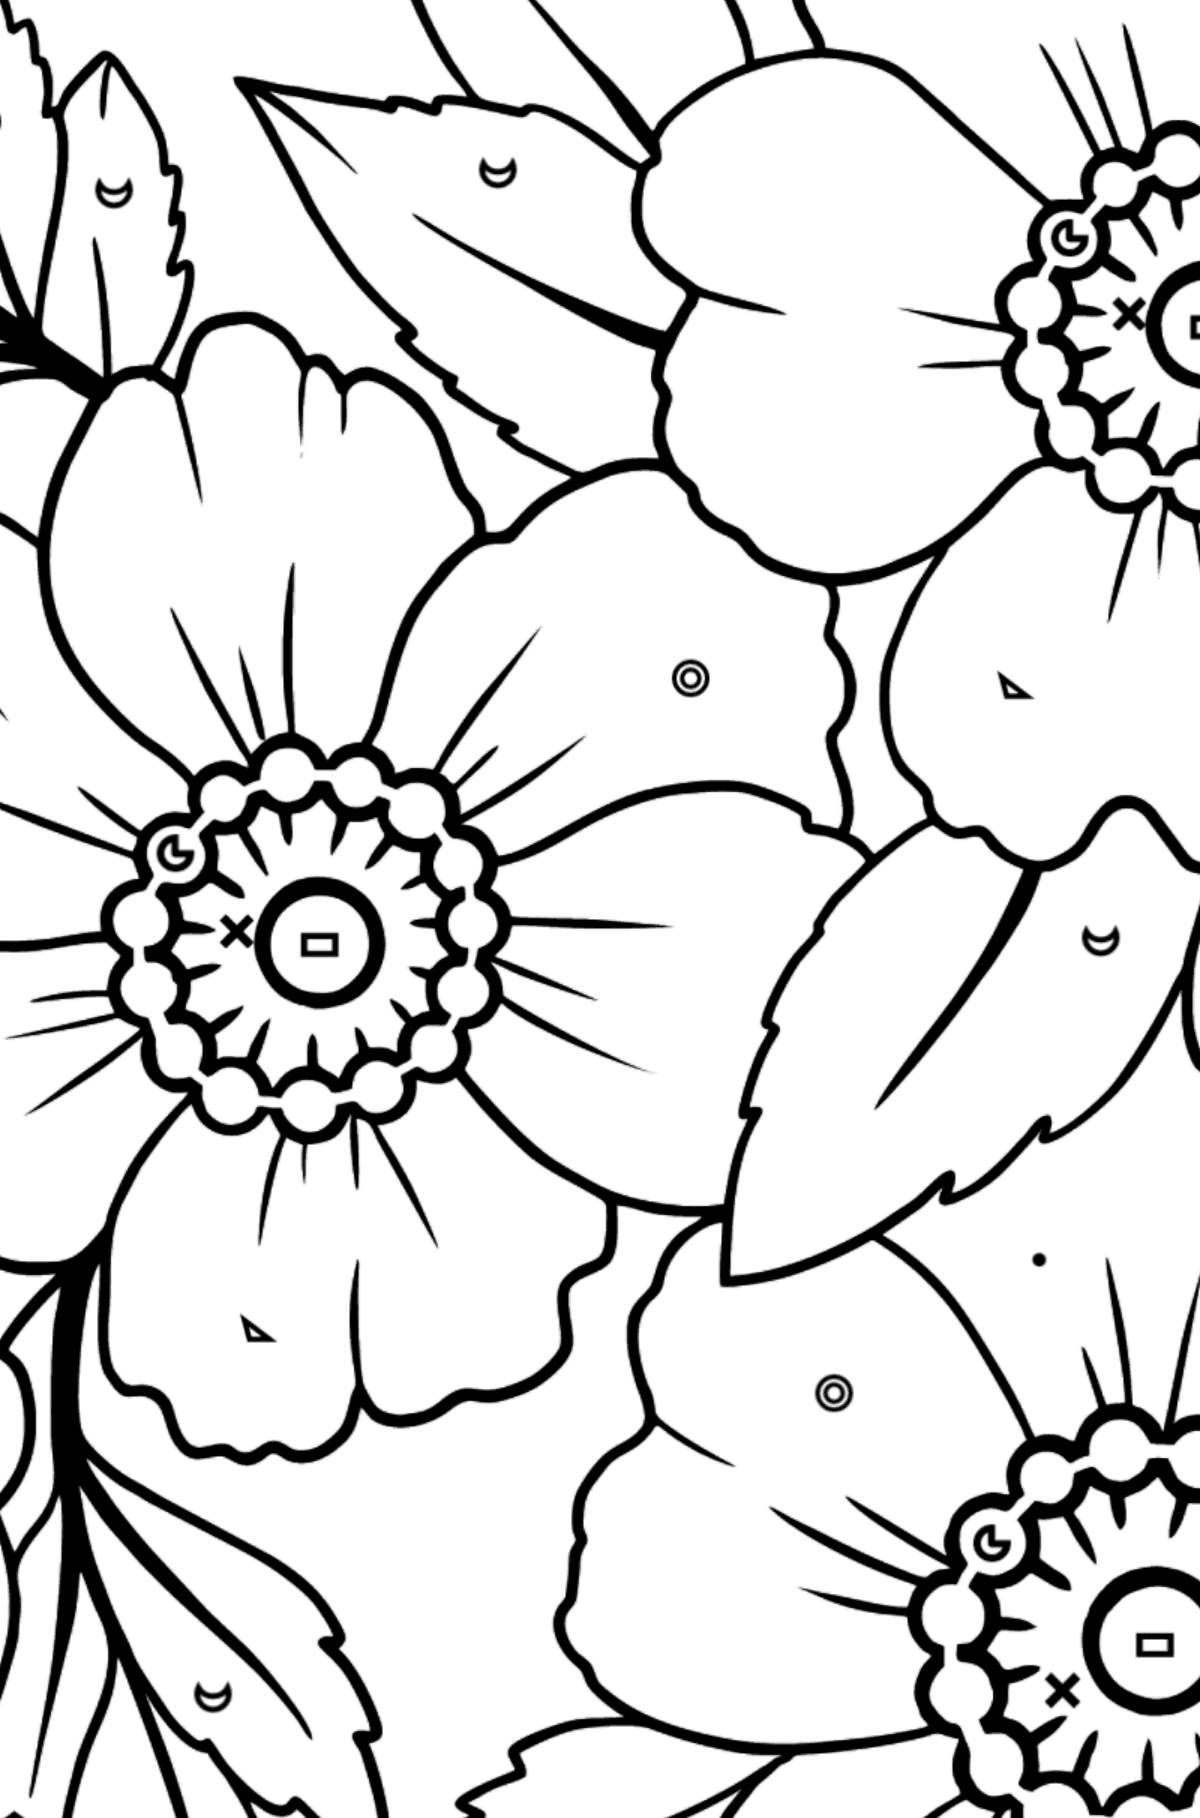 Flower Coloring Page - Japanese Anemone - Coloring by Symbols and Geometric Shapes for Kids